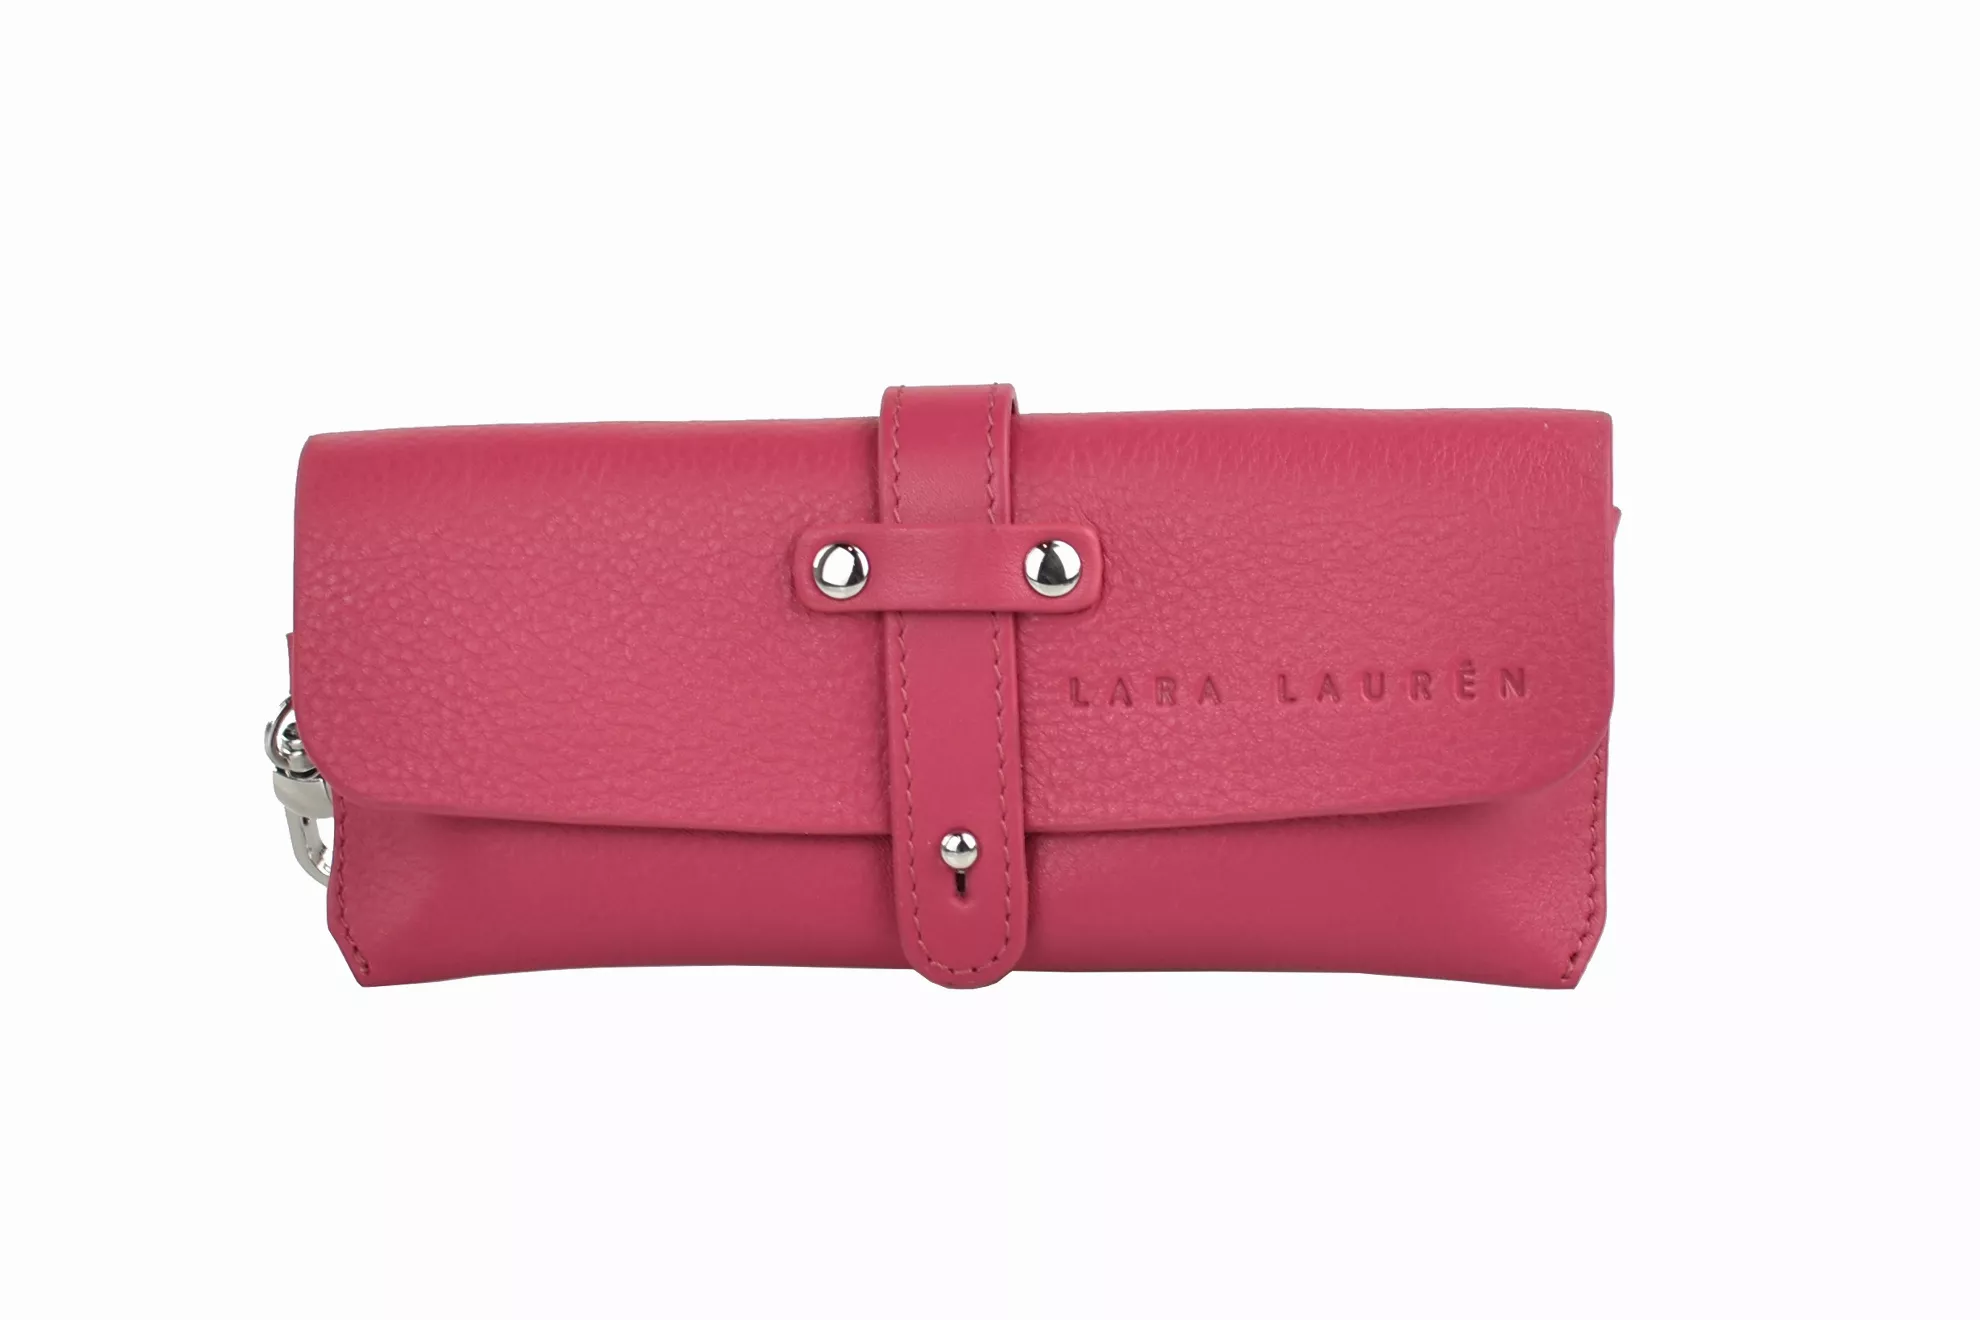 ROMY Suncover / Glases Case, pink